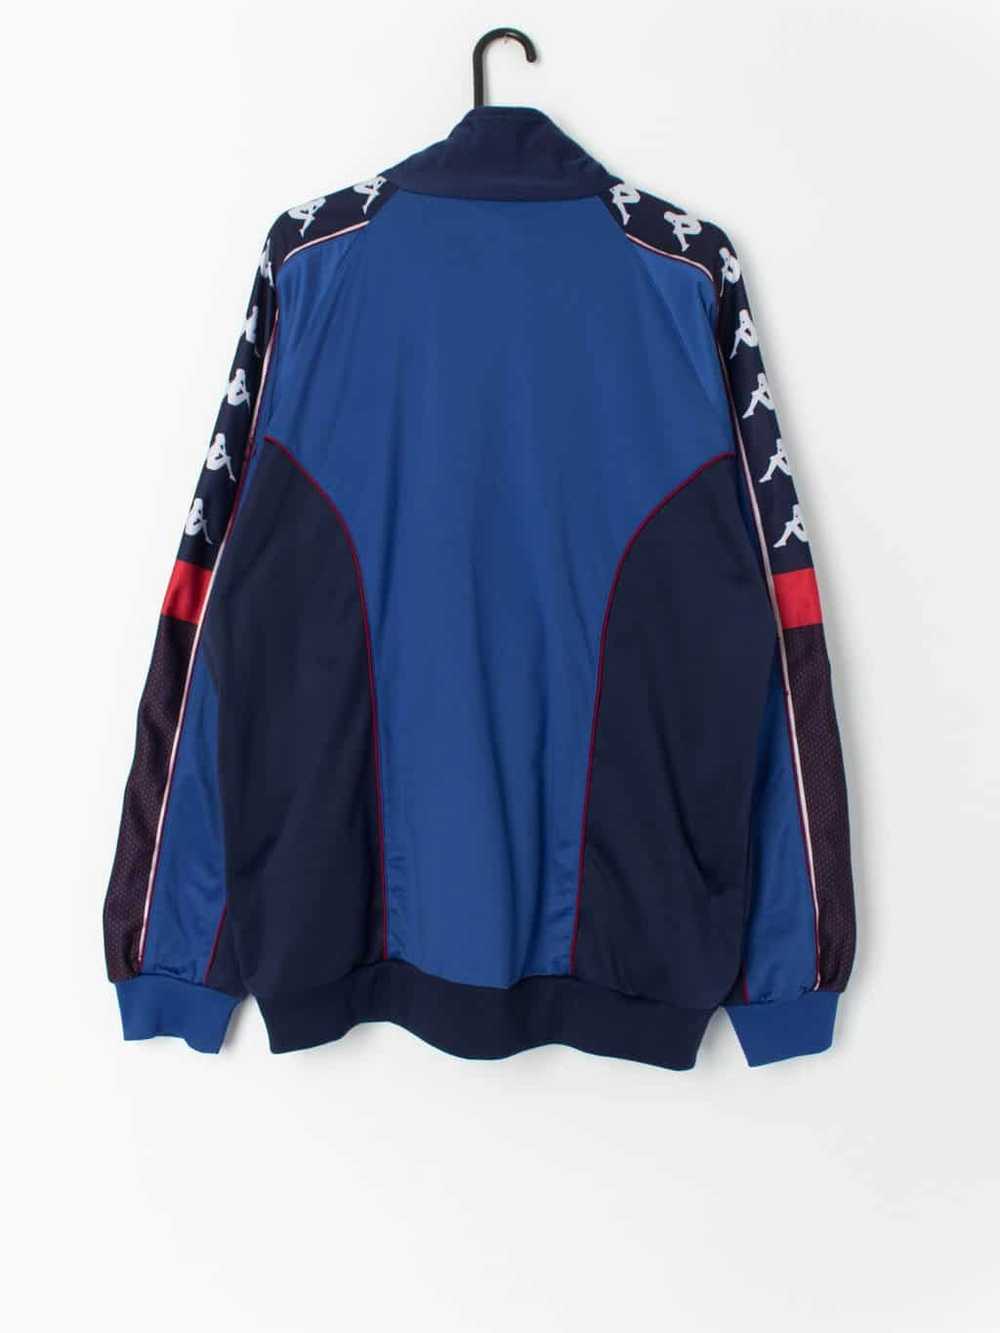 90s vintage Kappa track jacket, blue red and whit… - image 3